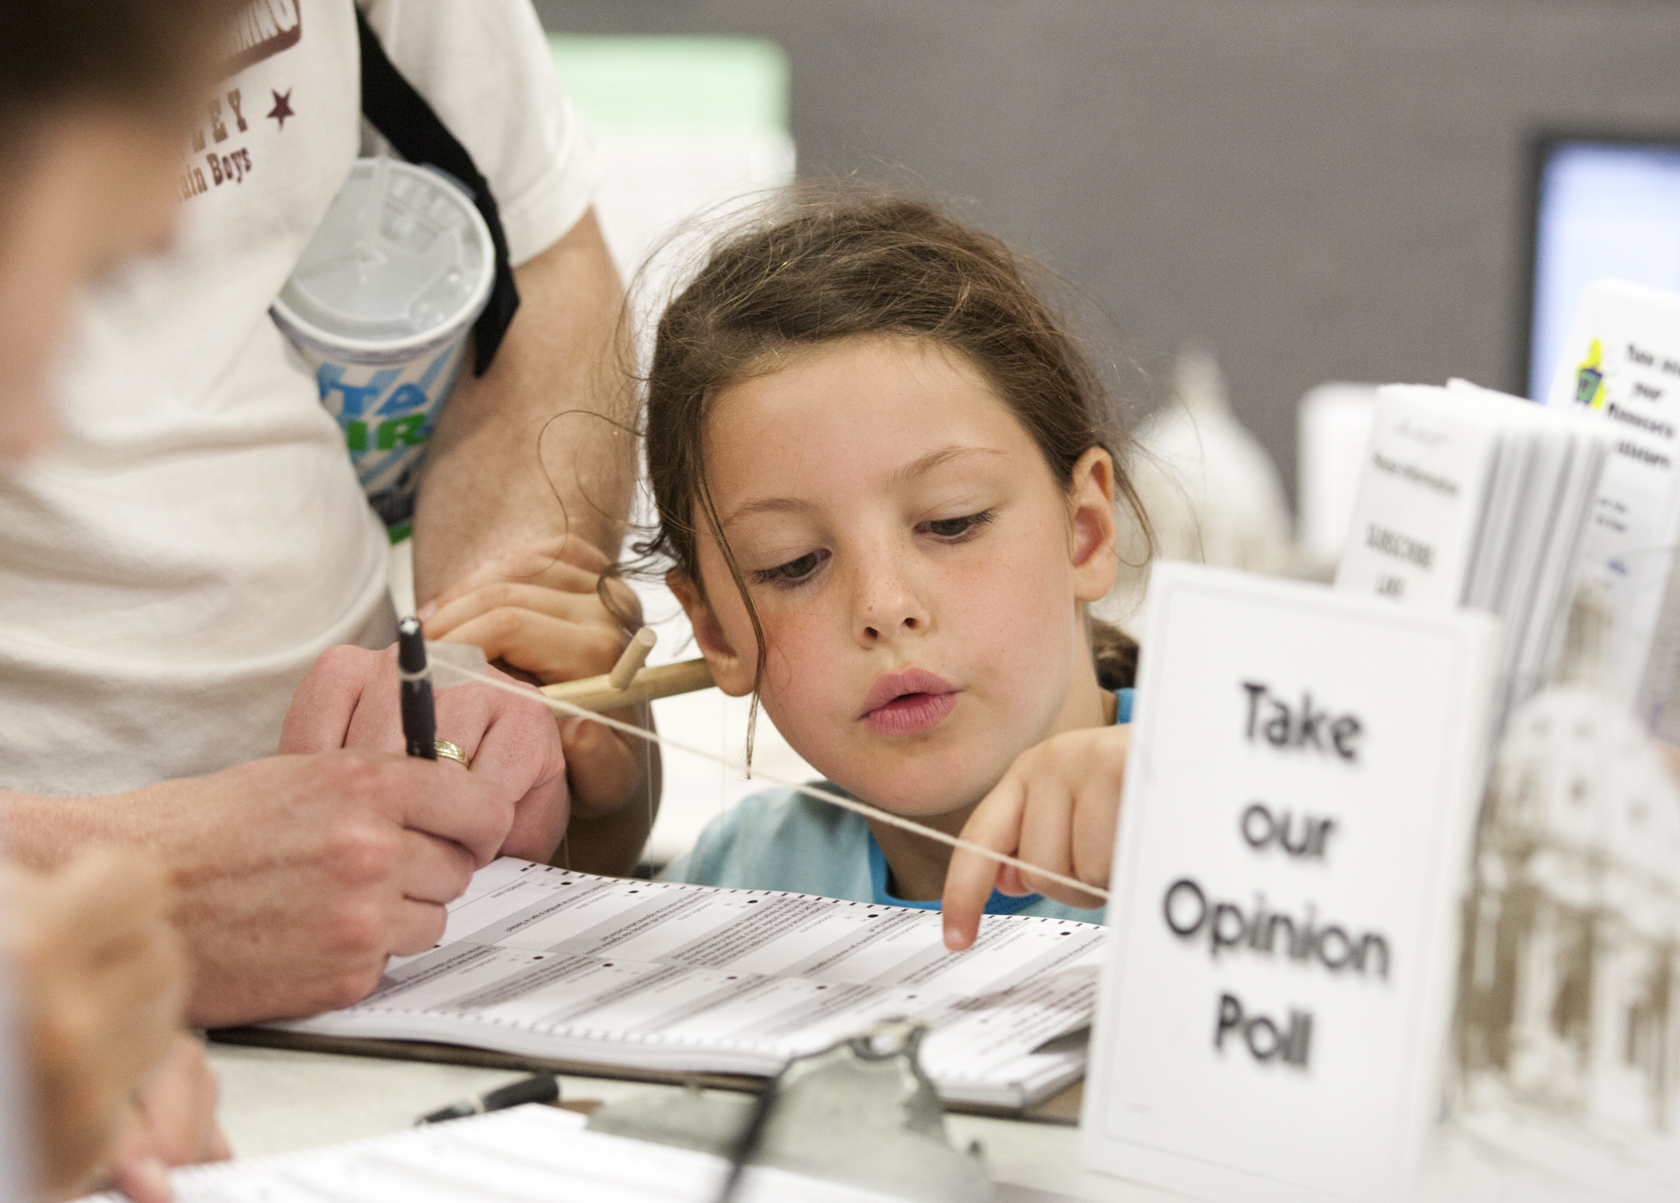 A young visitor checks over her dad's answers to the annual House opinion poll at the Minnesota State Fair. Photo by Paul Battaglia